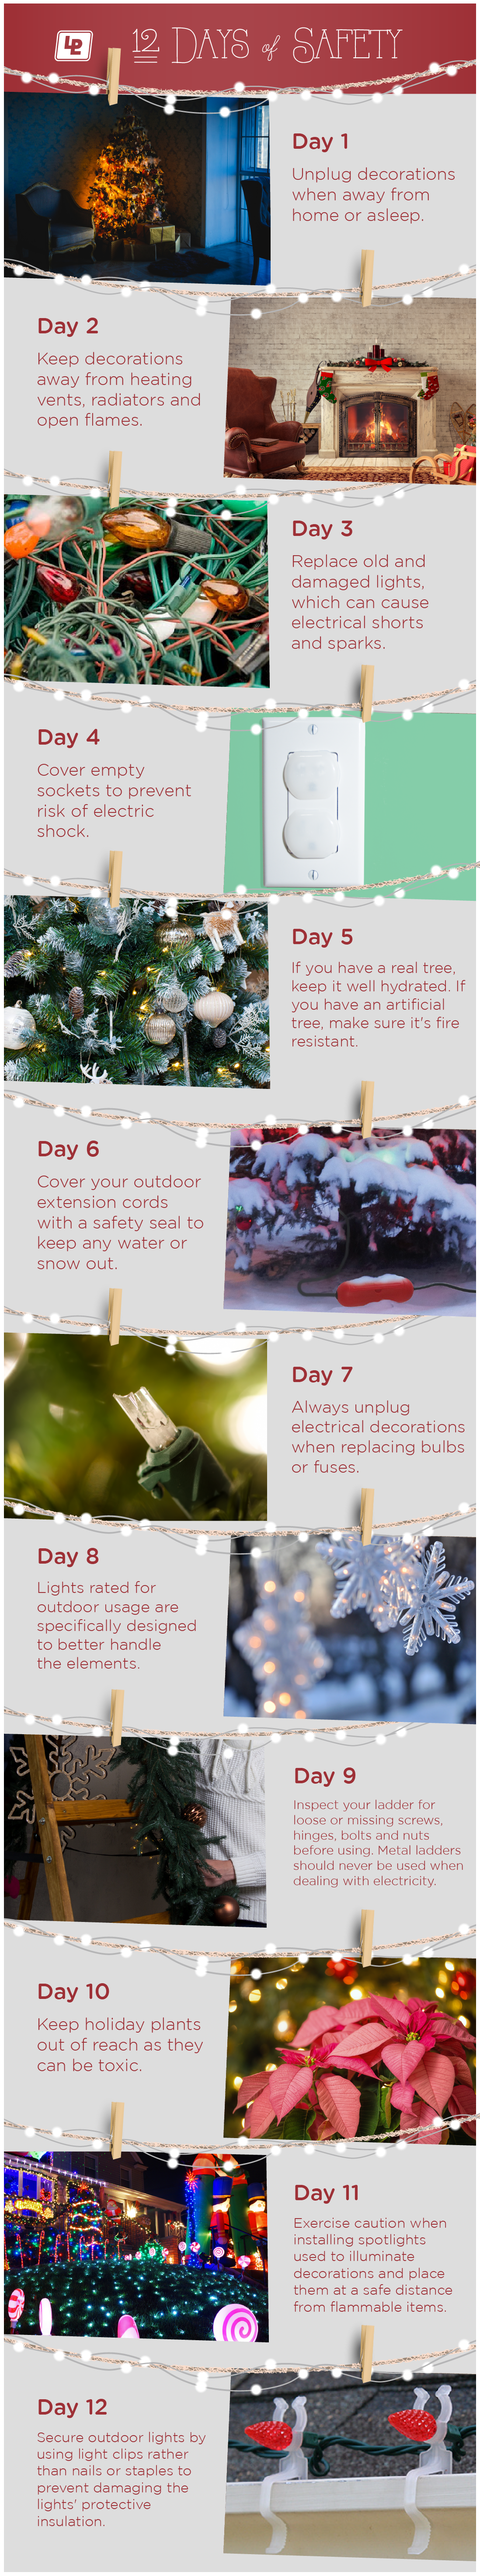 Lpl 0009 12 Days Of Safety Infographic